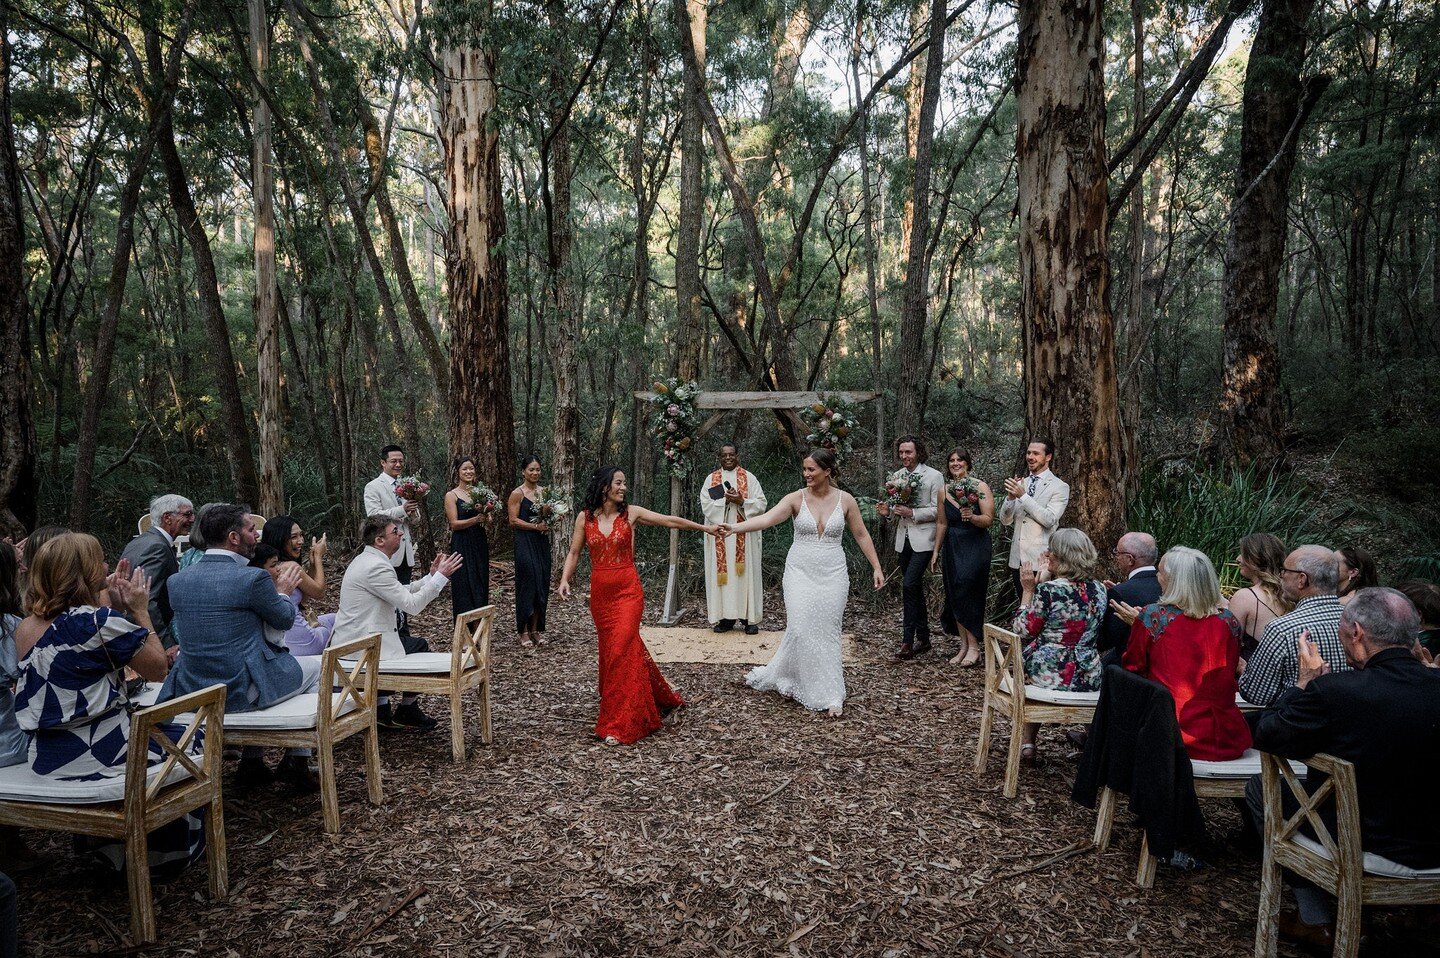 The magic of love captured by @freedomgarveyphotographer in the Karri forest at @tanahmarah ❤️

#tanahmarahweddings #freedomgarveyphotographer #weddingswithfreedom